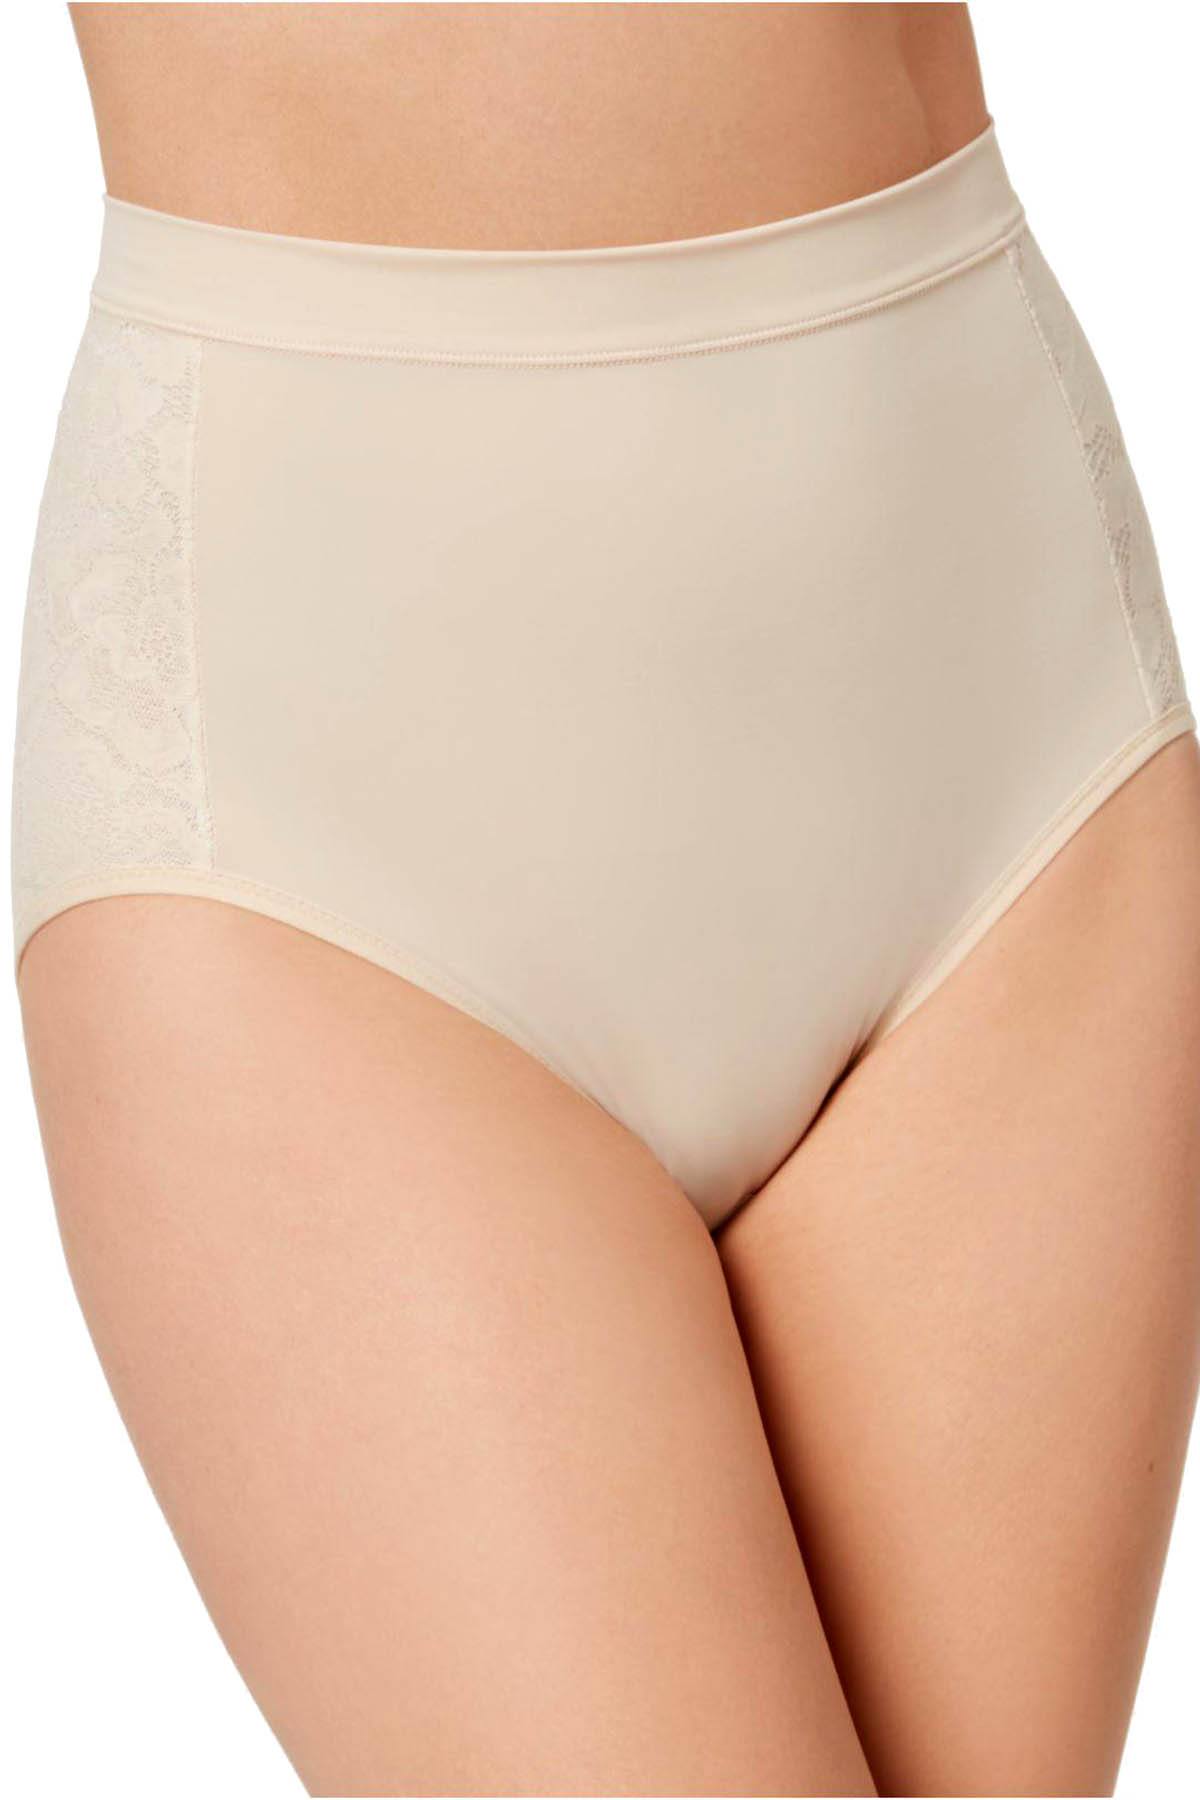 Maidenform Natural Firm Foundations Firm Control High Waist Lace Panel Brief